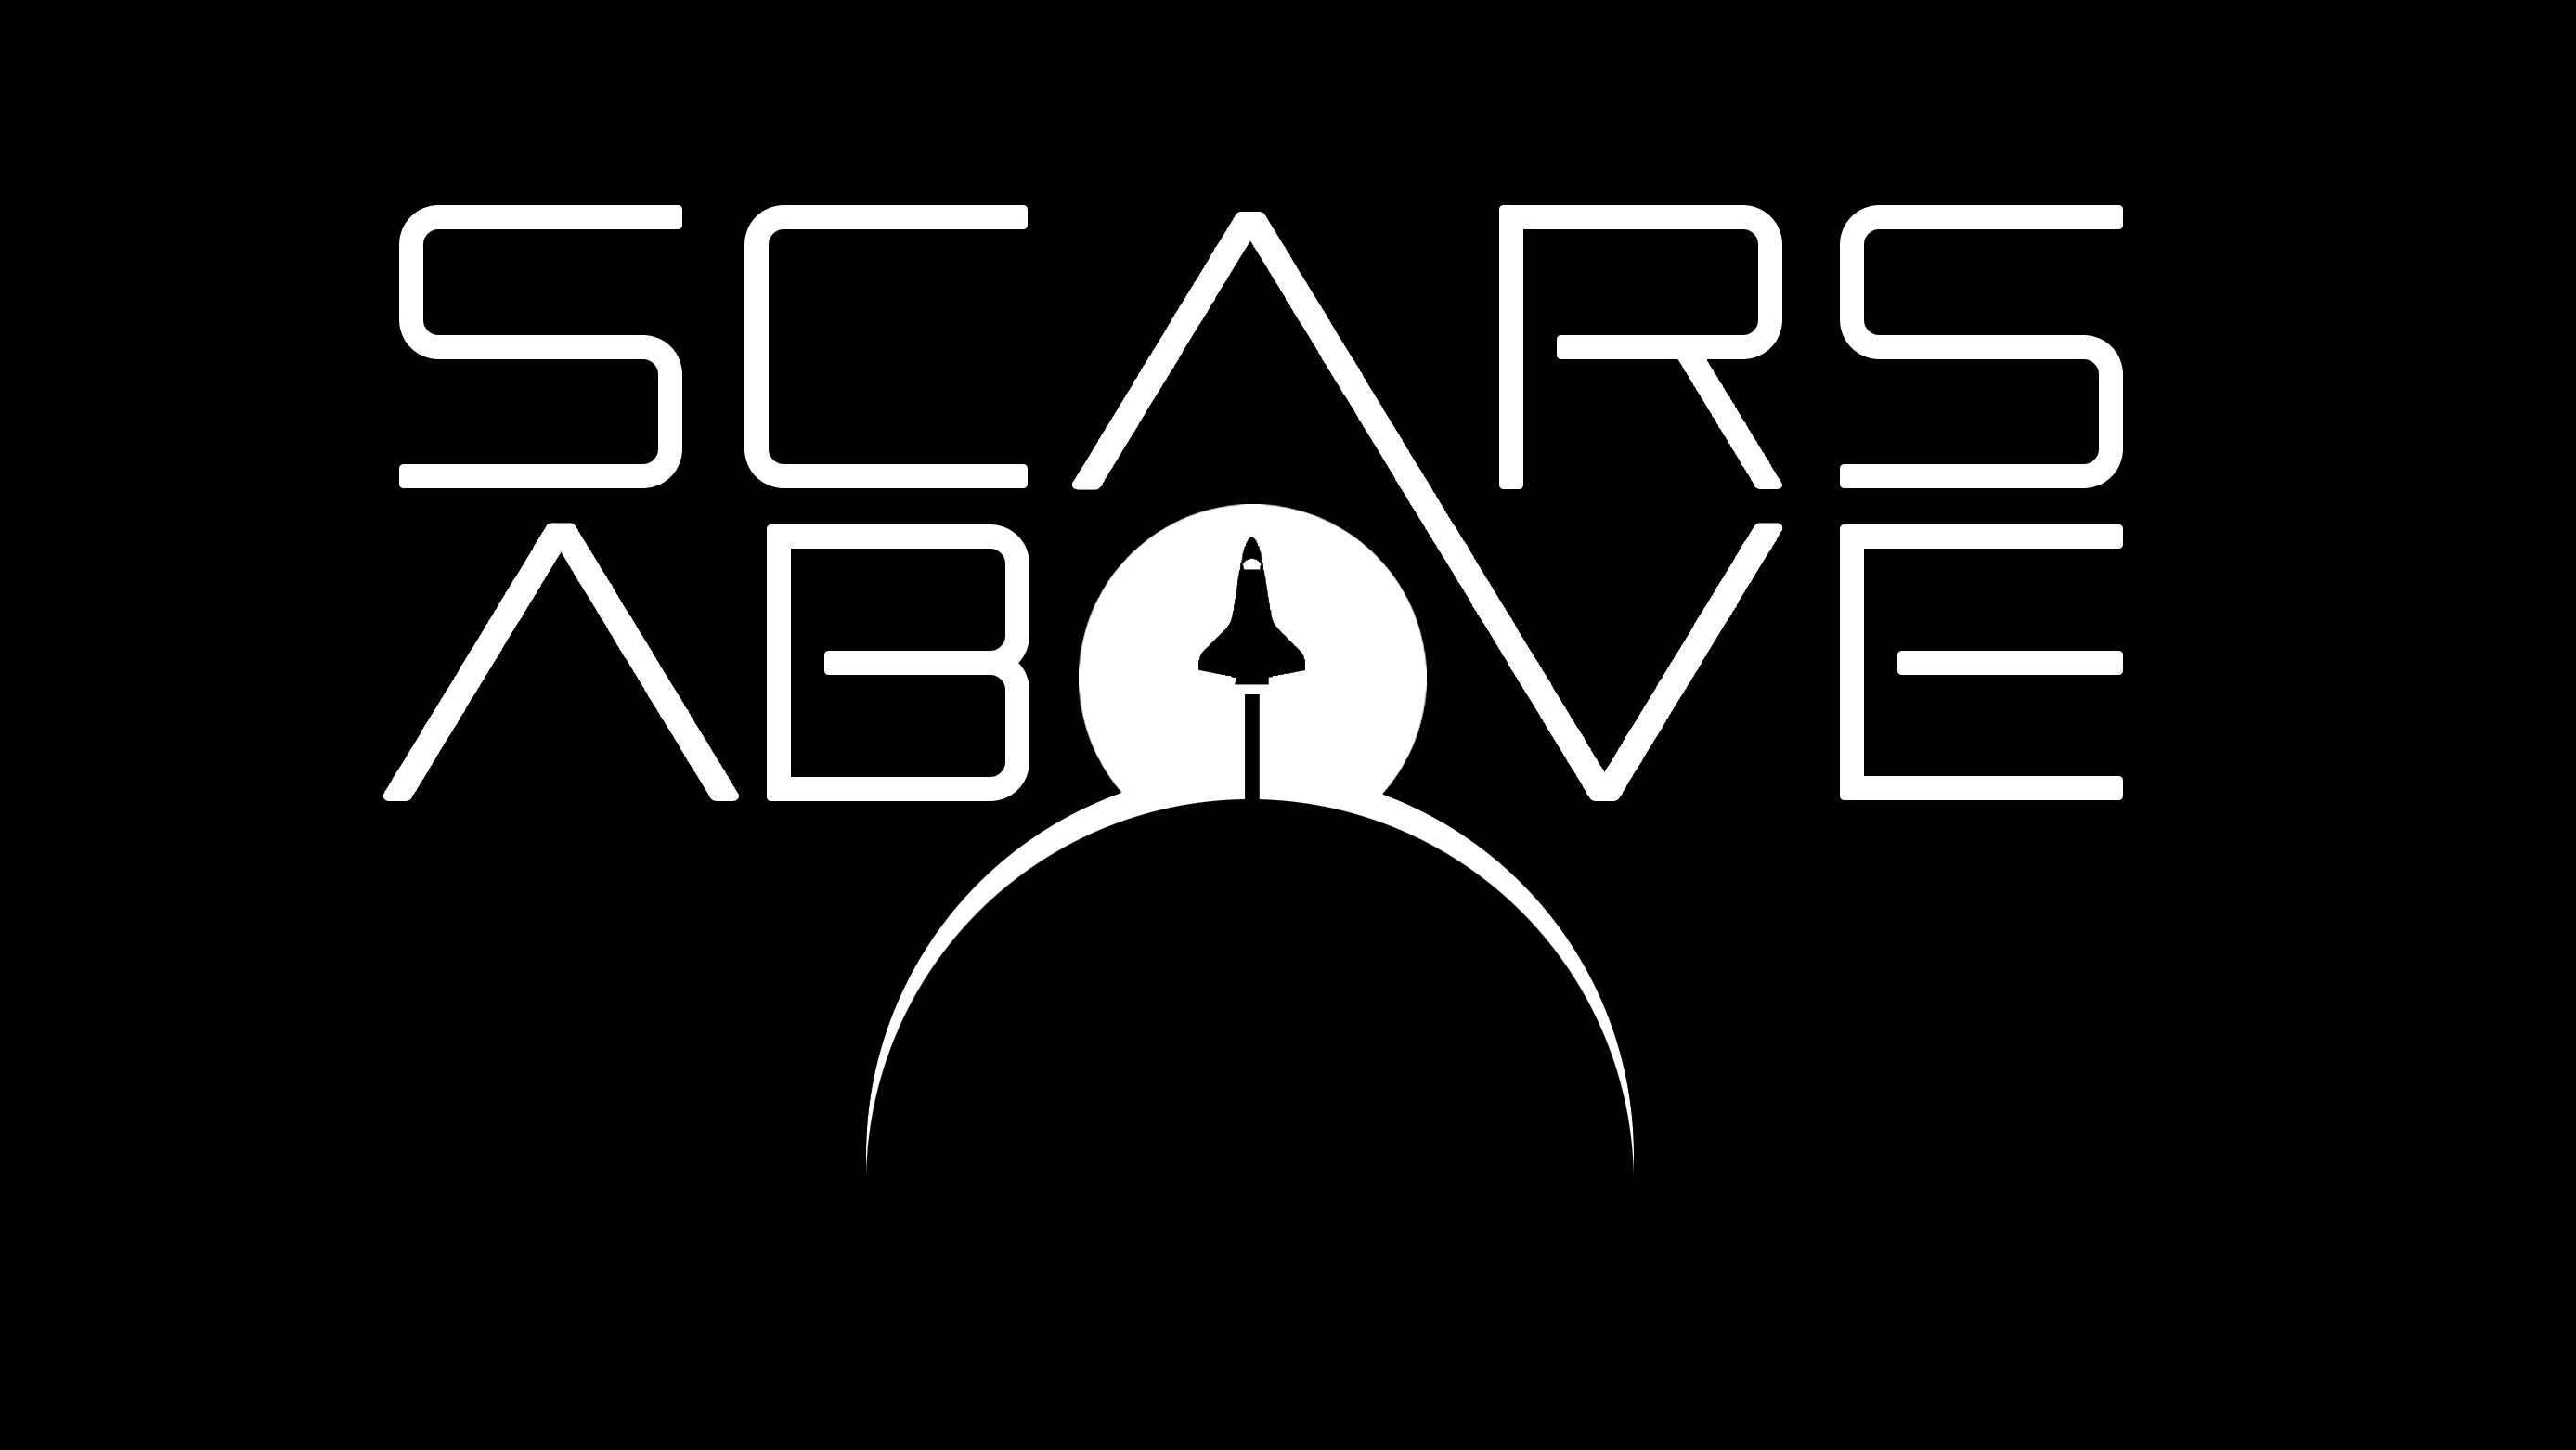 Scars Above is now on sale and releases its launch trailer